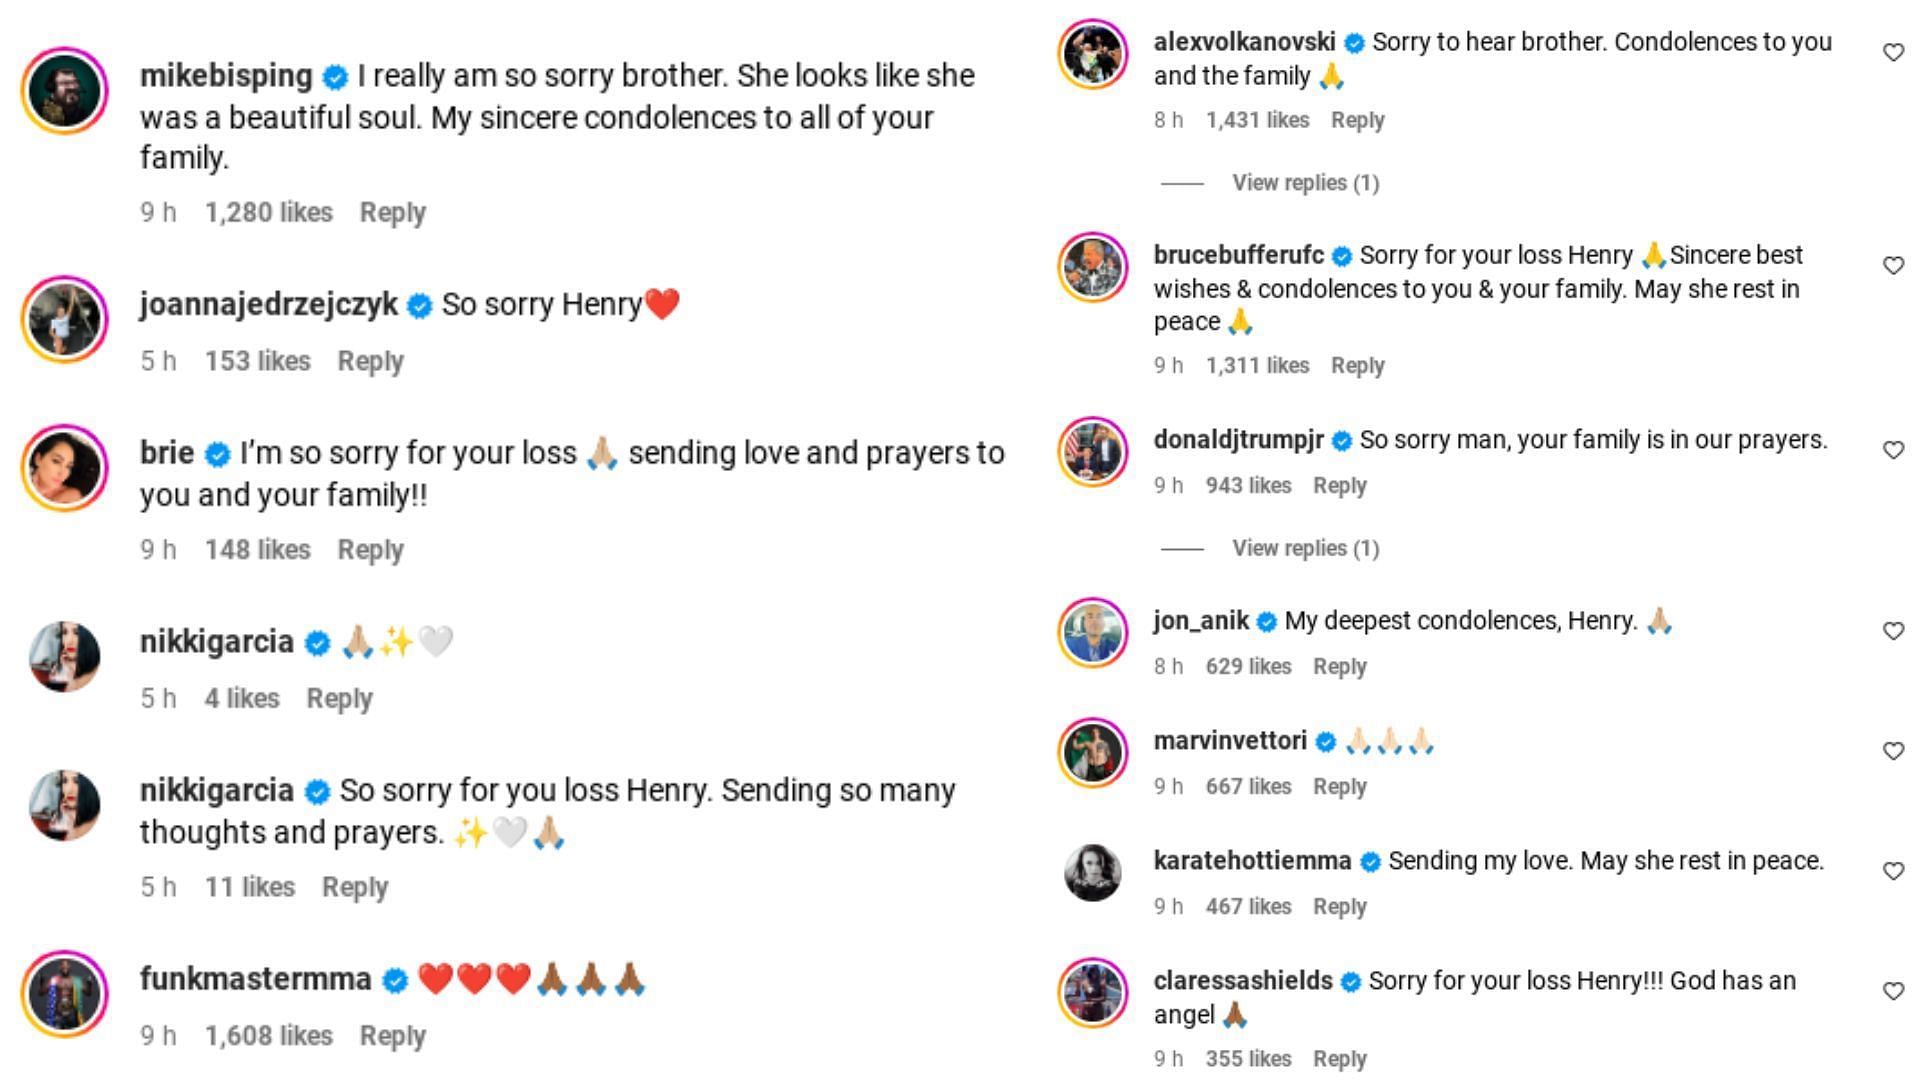 More messages of support on Instagram